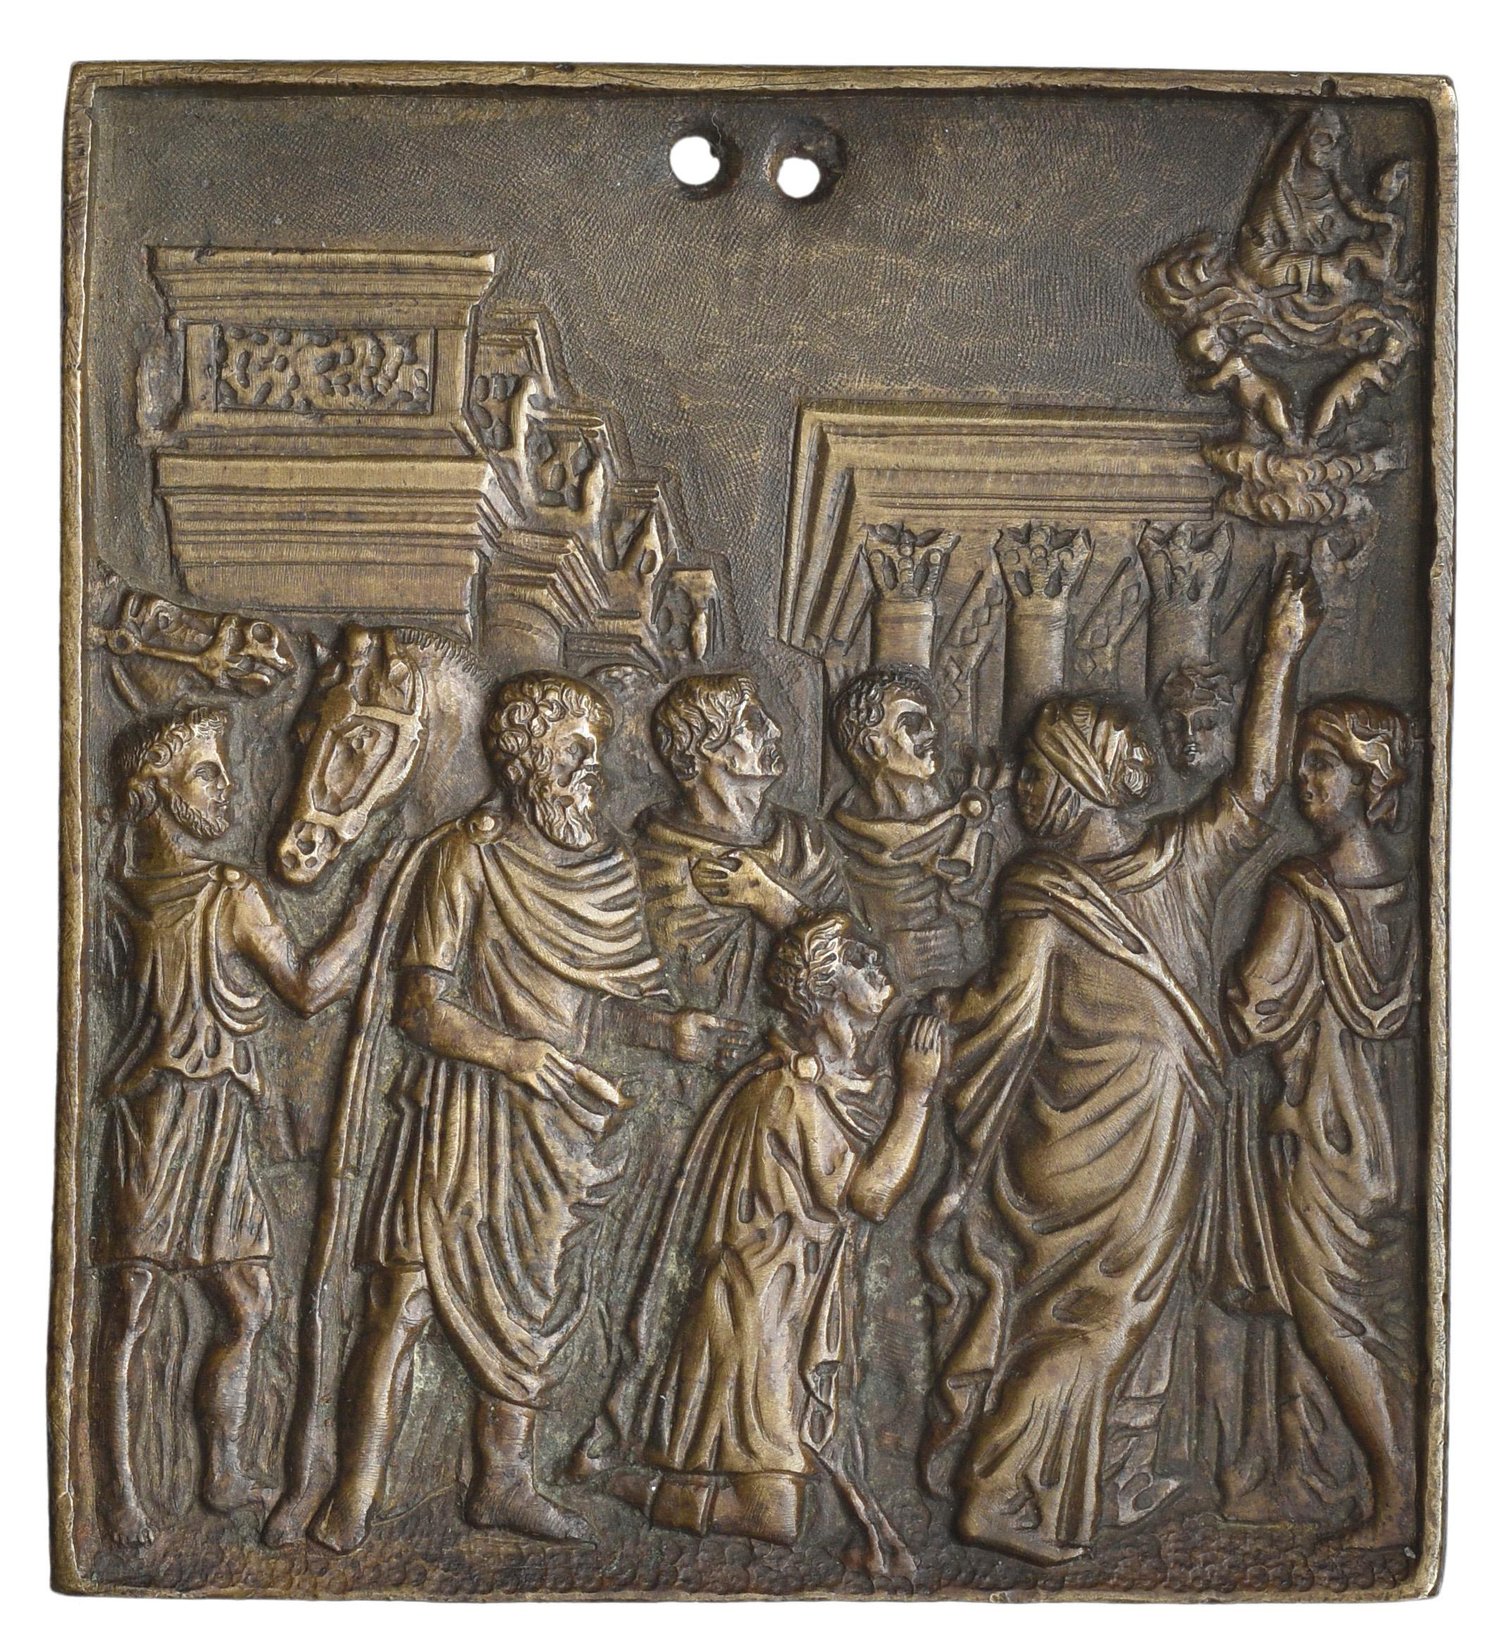 Image of Renaissance bronze plaquette of the Christian legend of Augustus and the Tiburtine Sybil